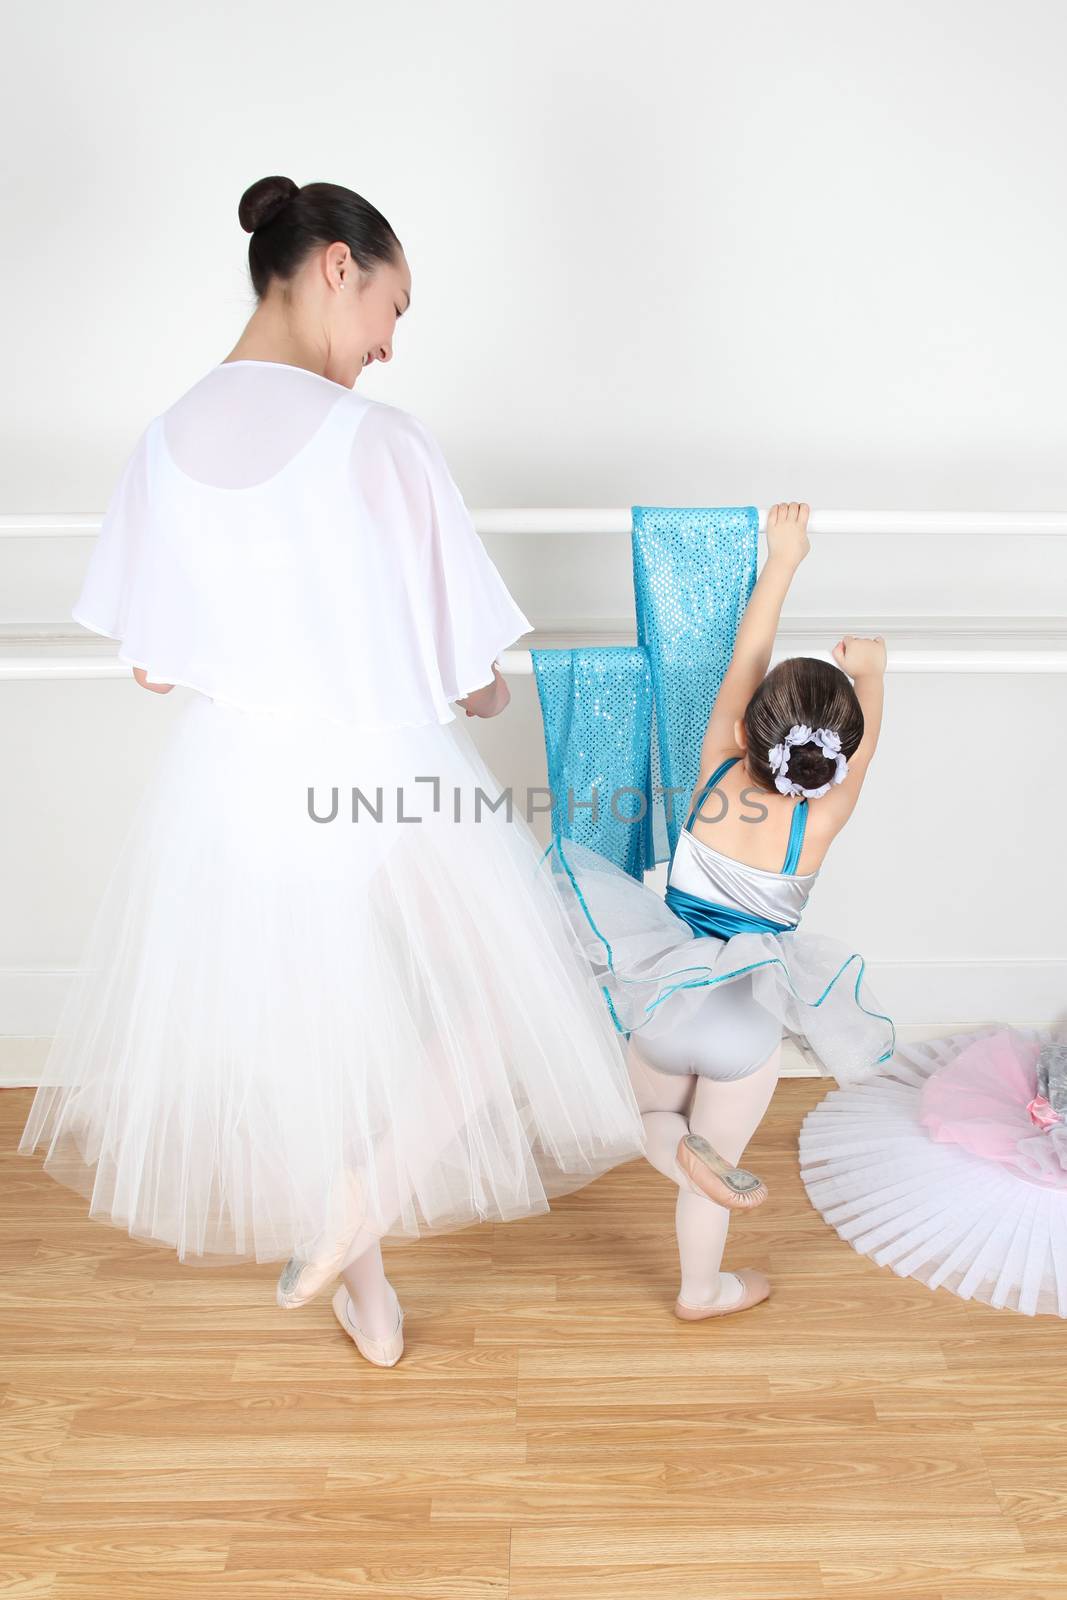 Teen dancer and toddler in costume at dance studio